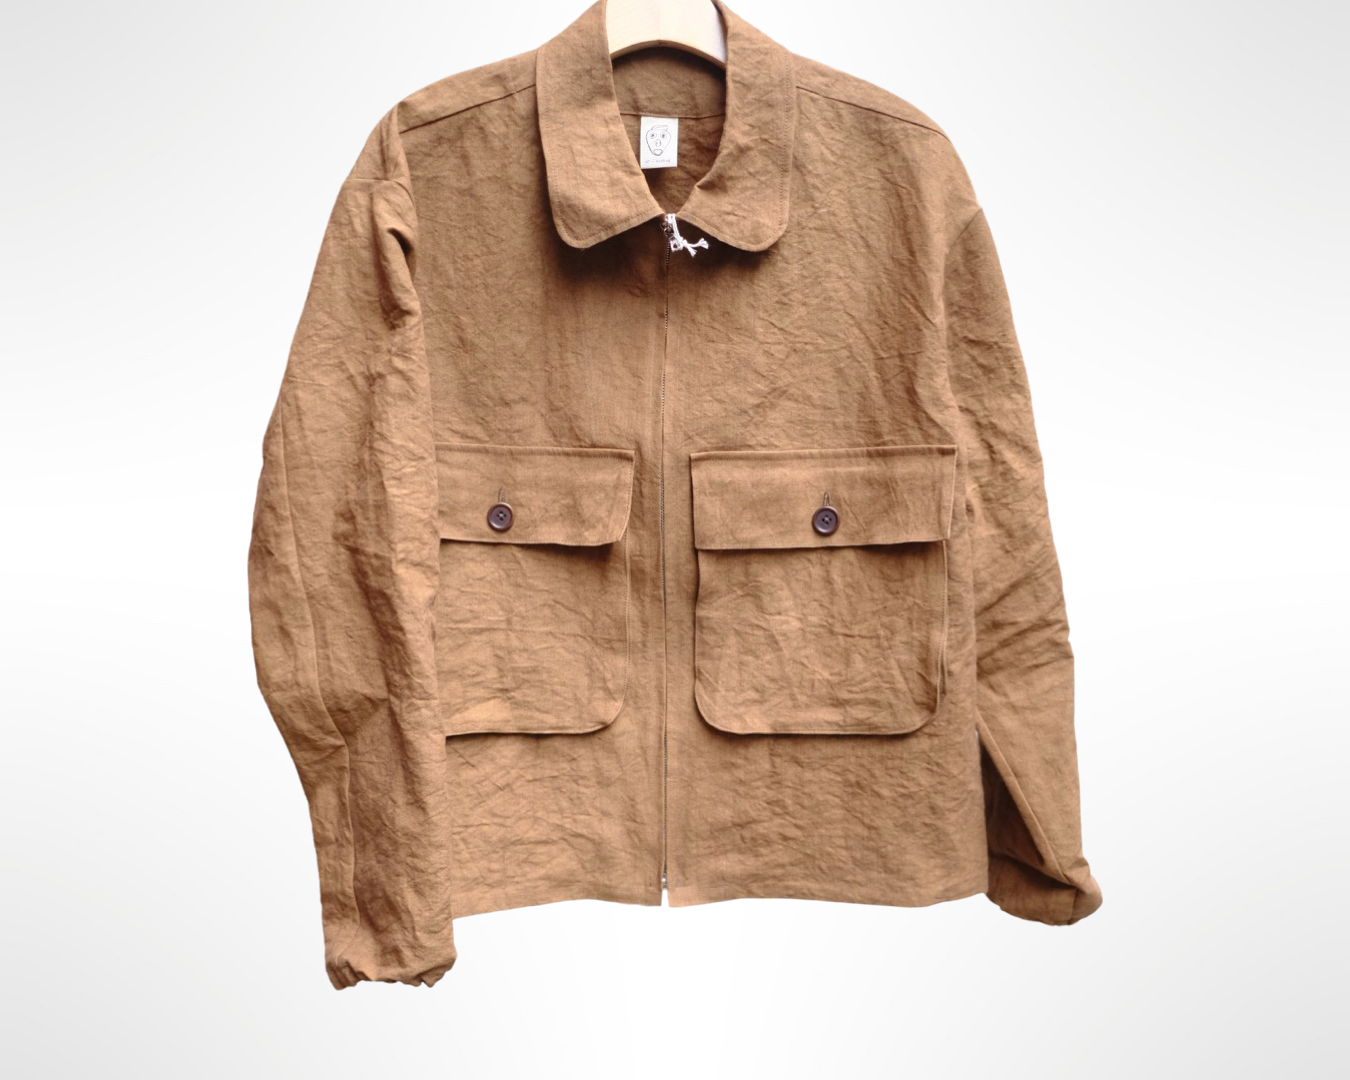 fishing jacket in persimmon dyed paper/linen